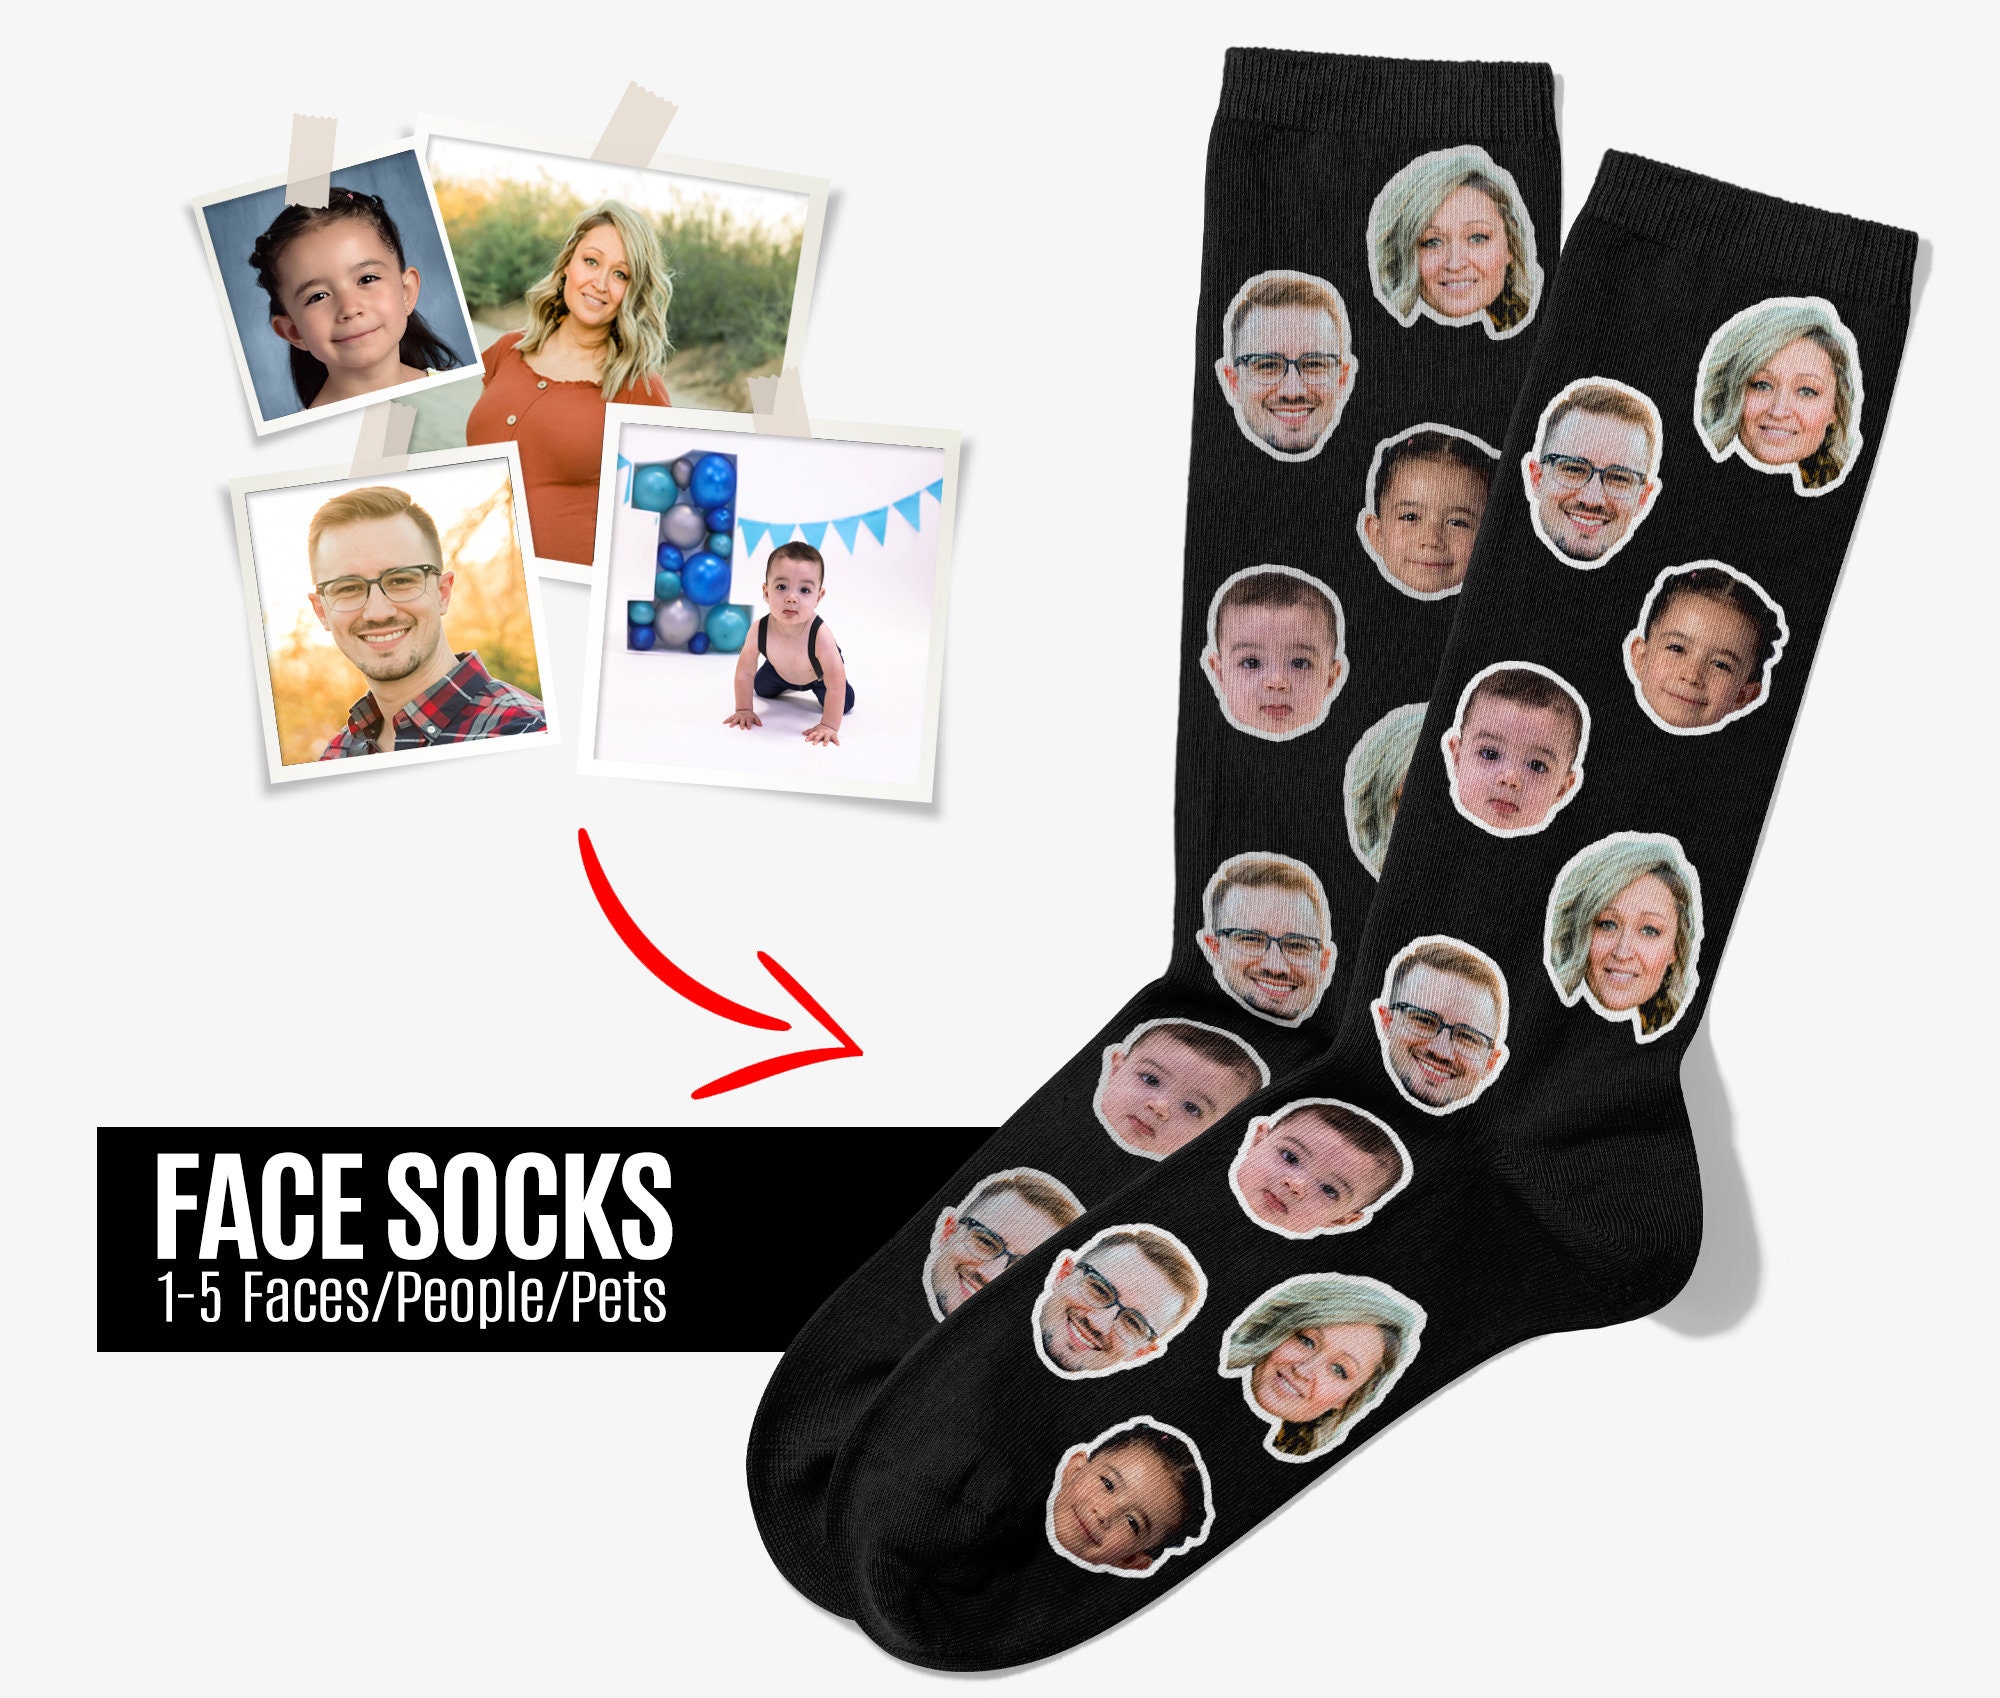 50% OFF SALE - Custom Face Socks, Photo Personalized Socks, Christmas Gift, Faces On Socks, Picture Socks, Personalized Gift